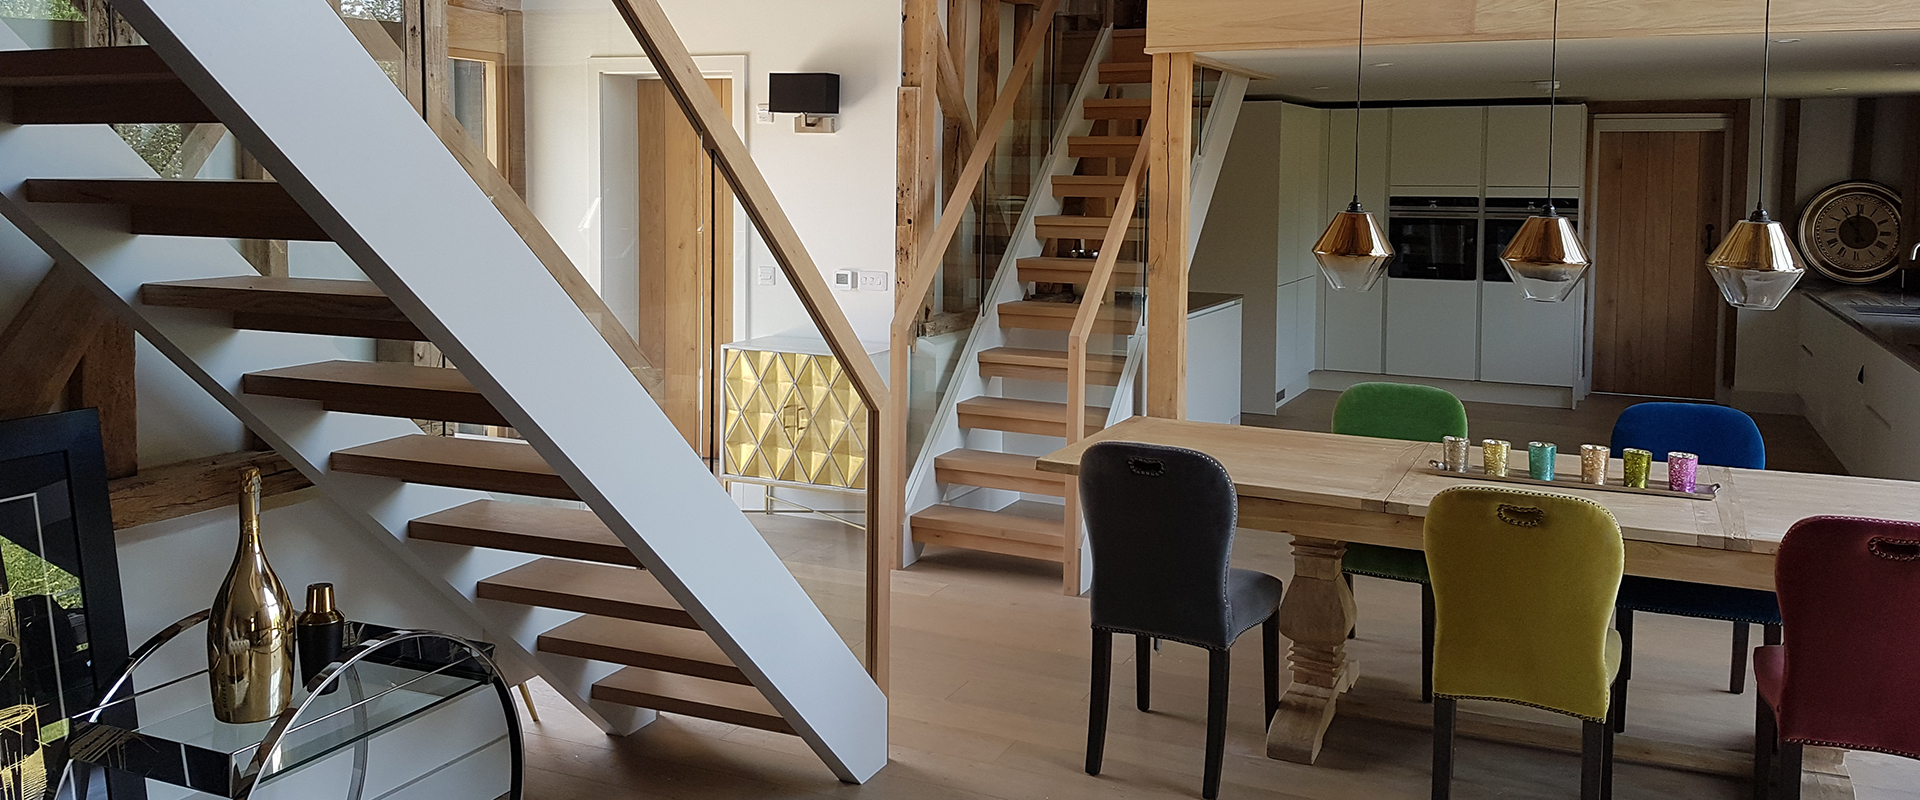 Bespoke Wooden Staircases in kent'